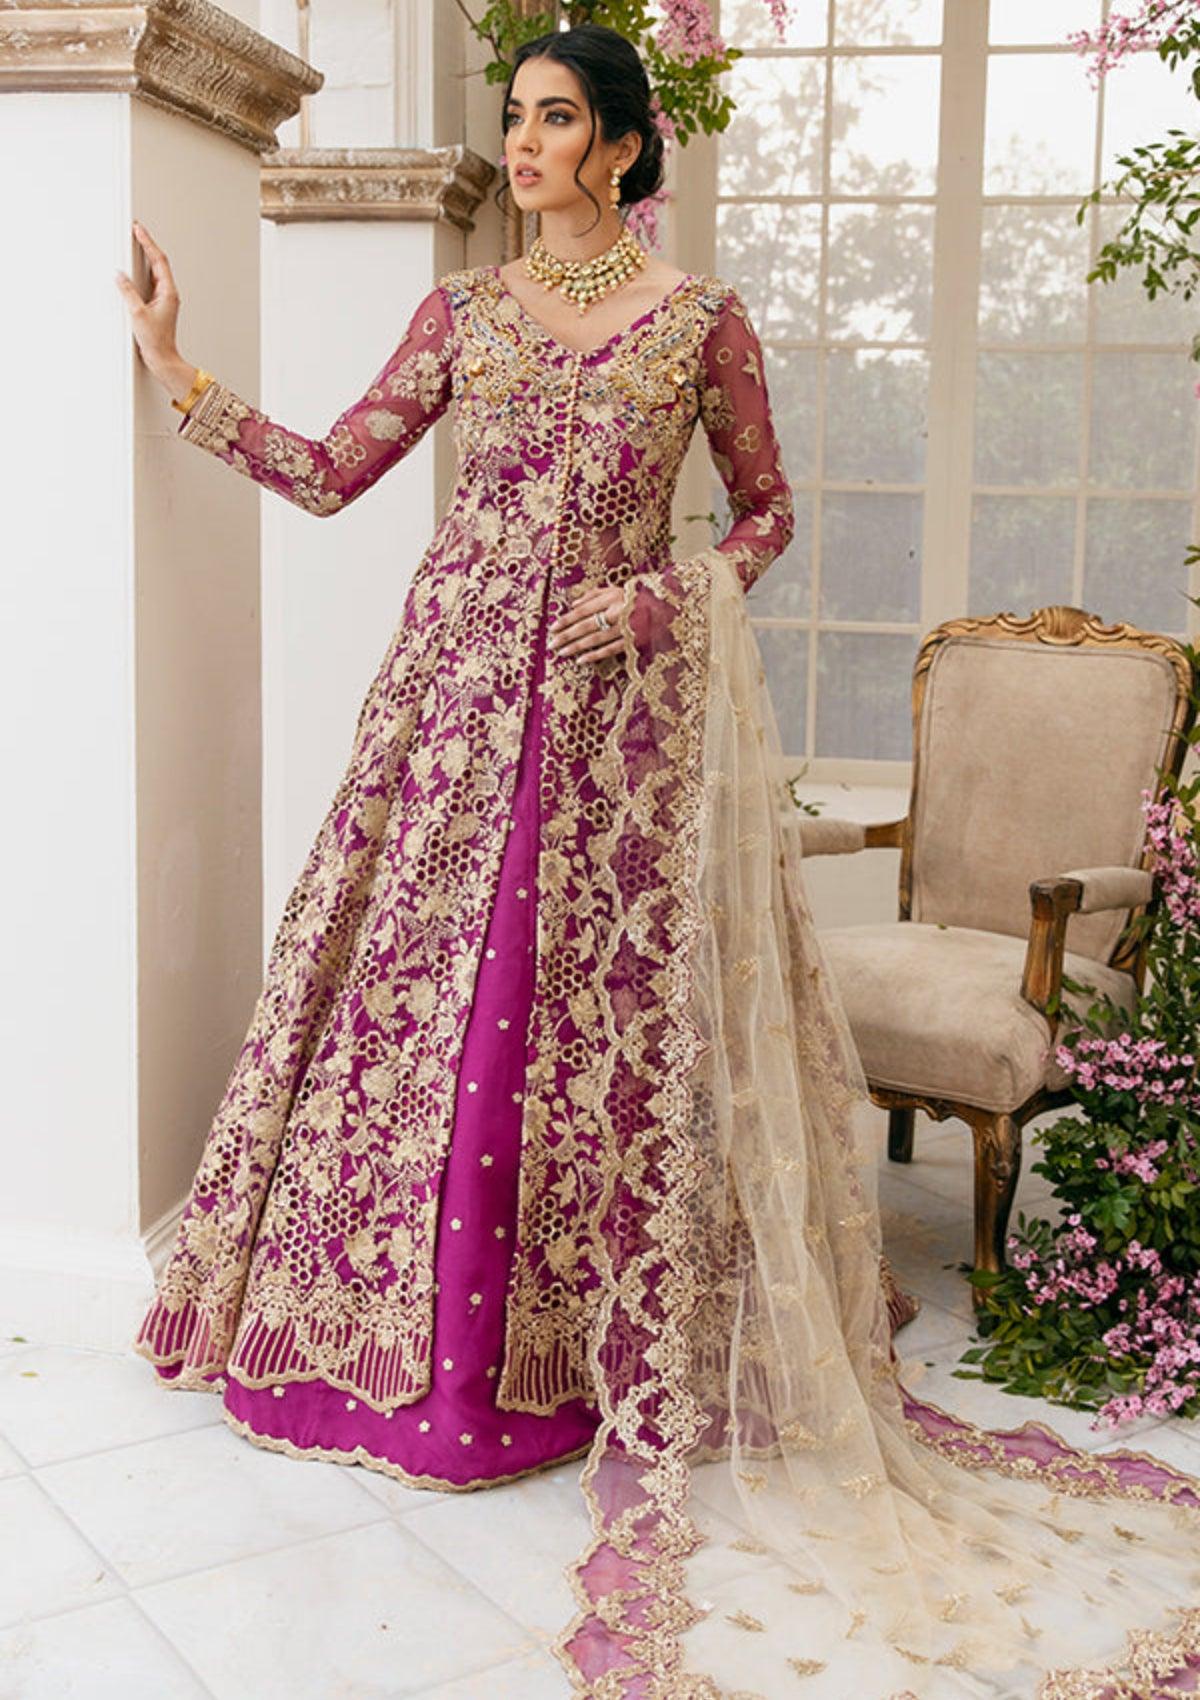 Imrozia Premium Brides'22 IB-22-Lucia is available at Mohsin Saeed Fabrics. ✓ buy all the top women clothing brands in pakistan ✓ Best Price and Offers ✓ Free Shipping ✓ Cash on Delivery ✓ formal & Wedding Collections 